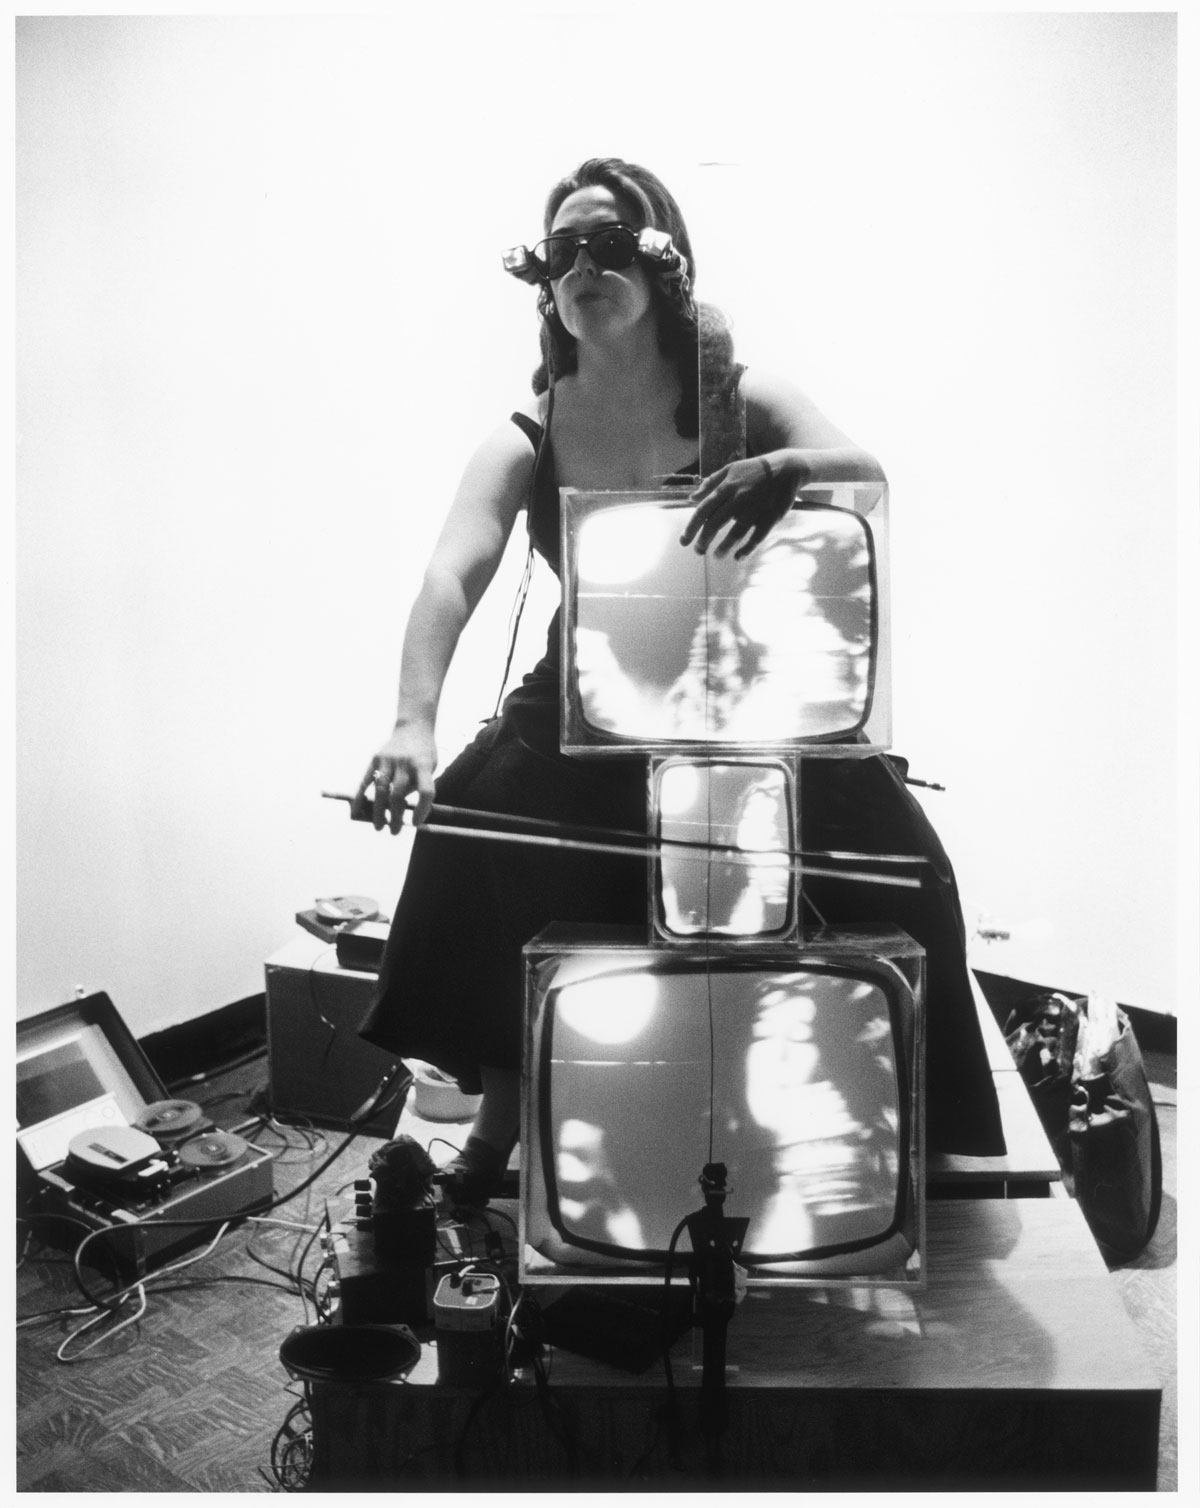 In a black-and-white photo, a woman wearing glasses made from small TVs plays a "cello" made from three TV monitors.